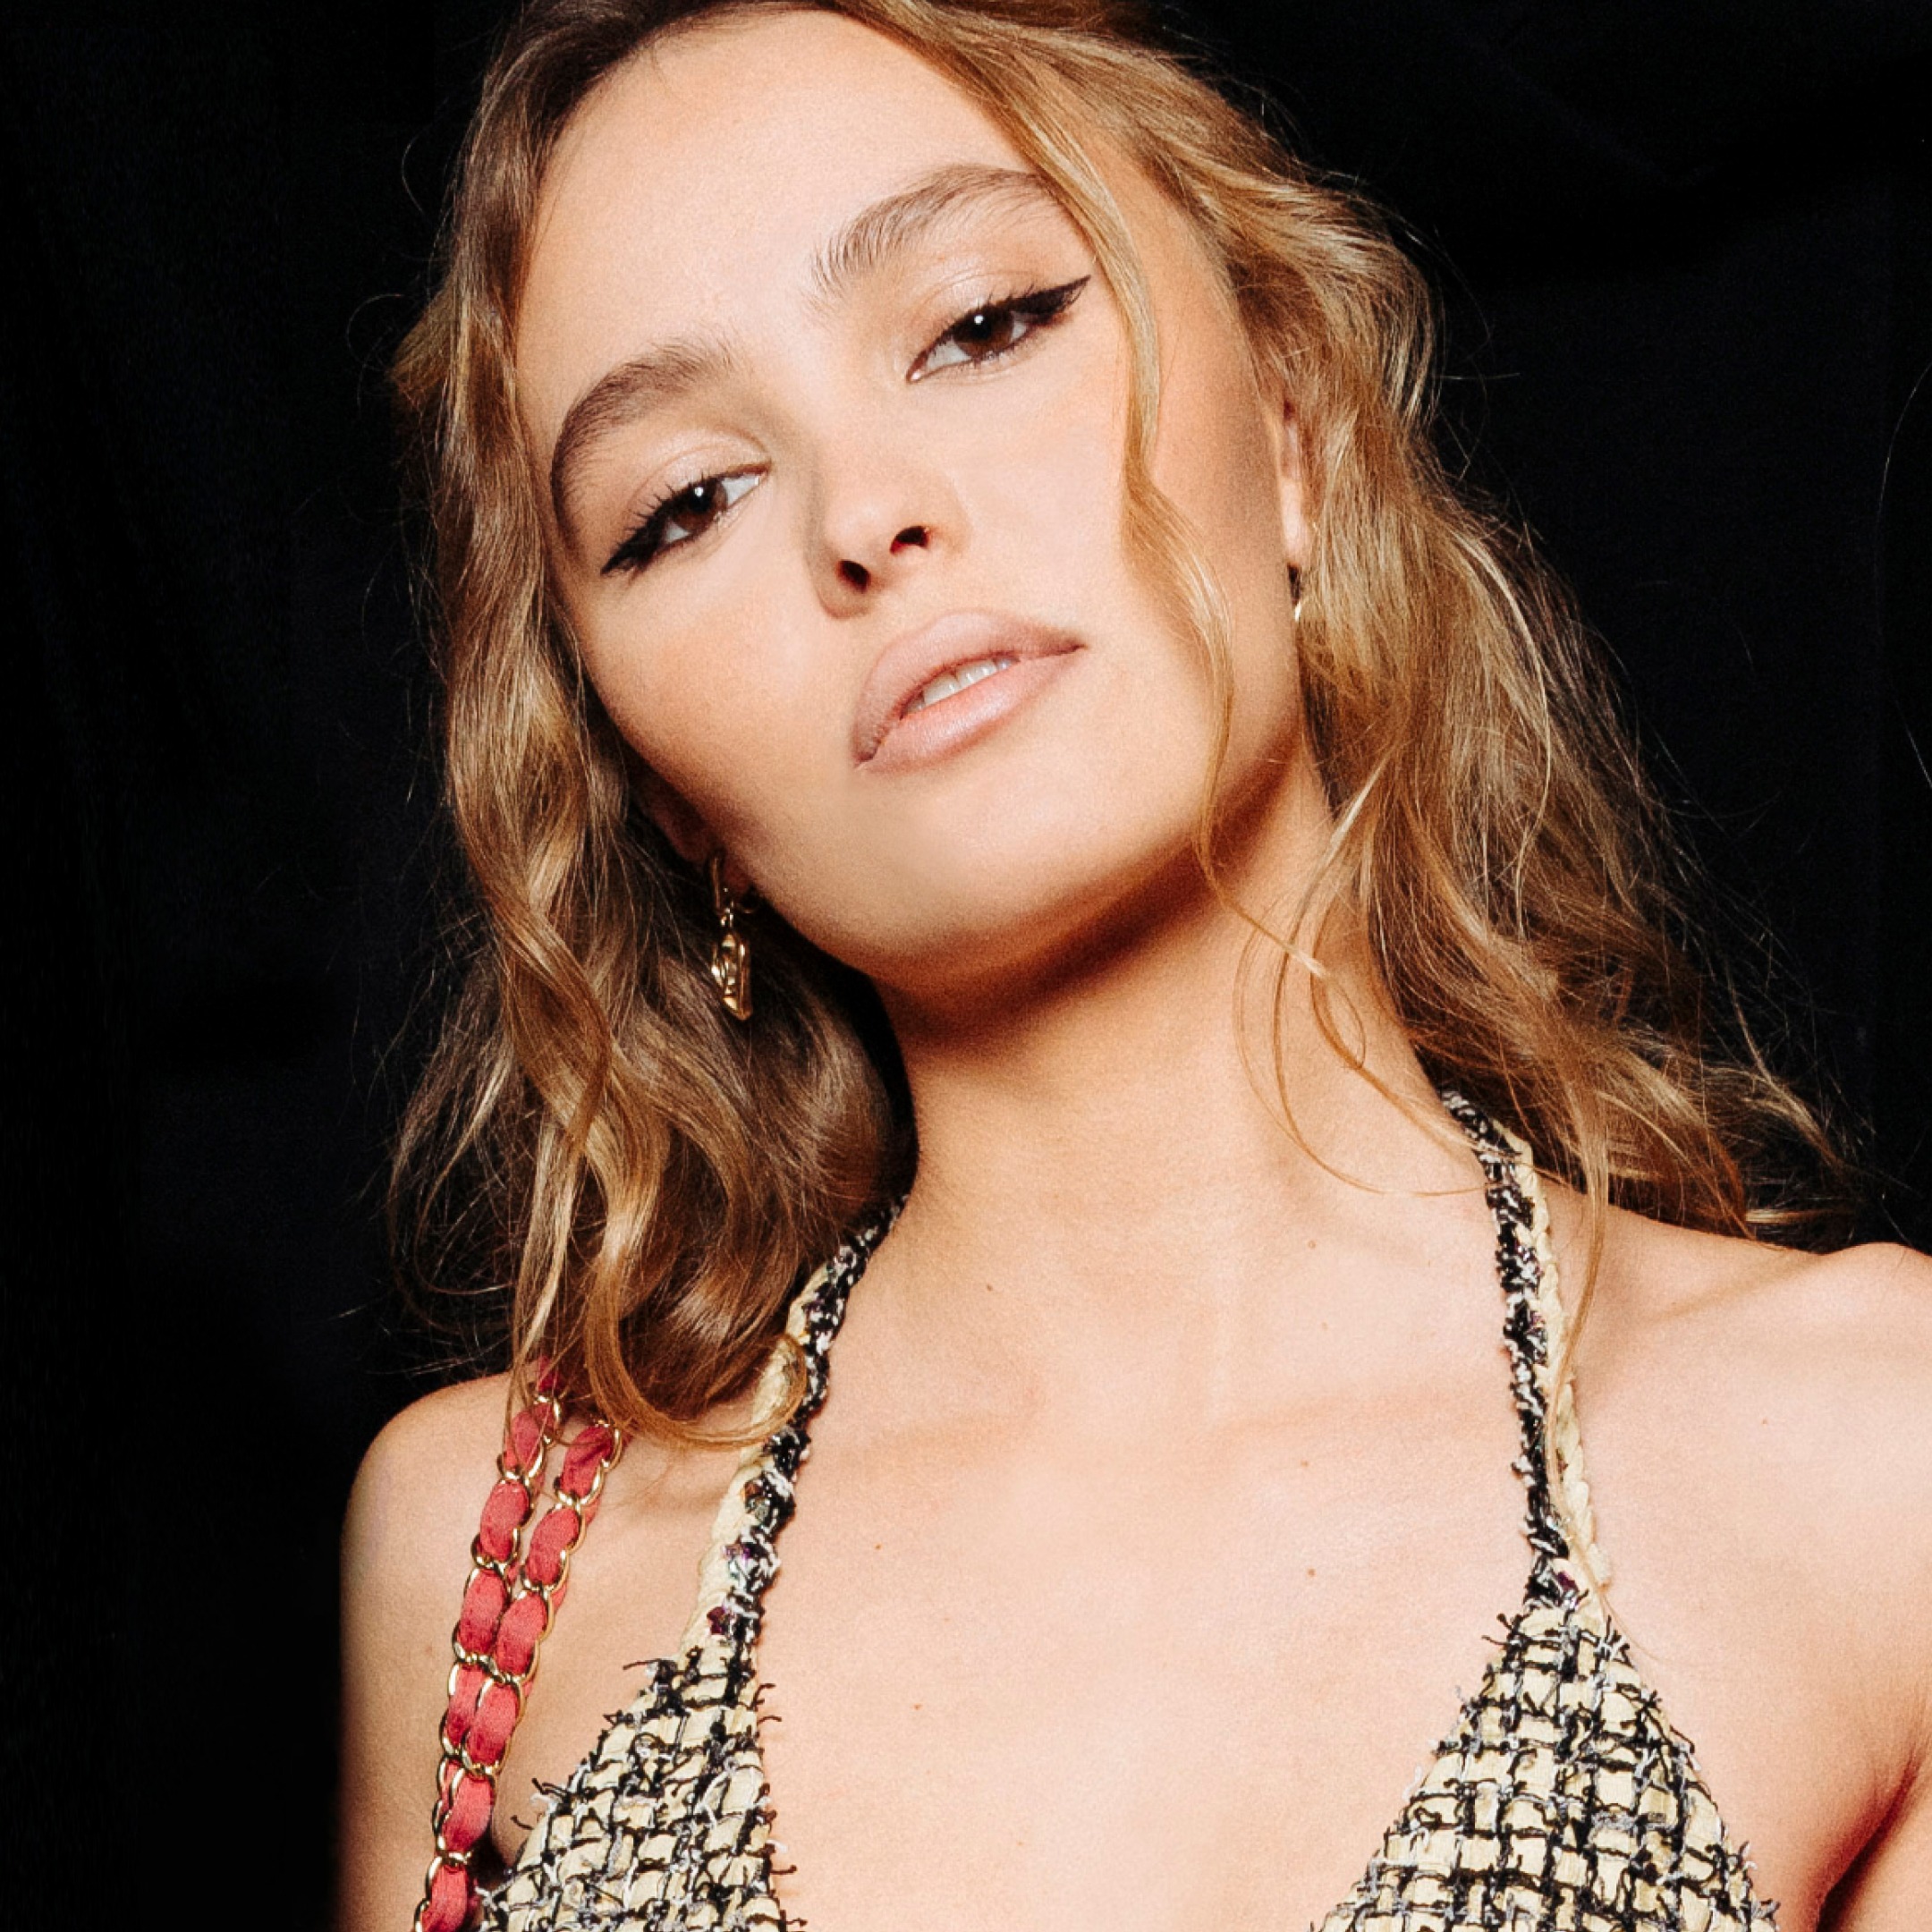 Behind-The-Scenes At Chanel SS 2022 Show With Lily-Rose Depp